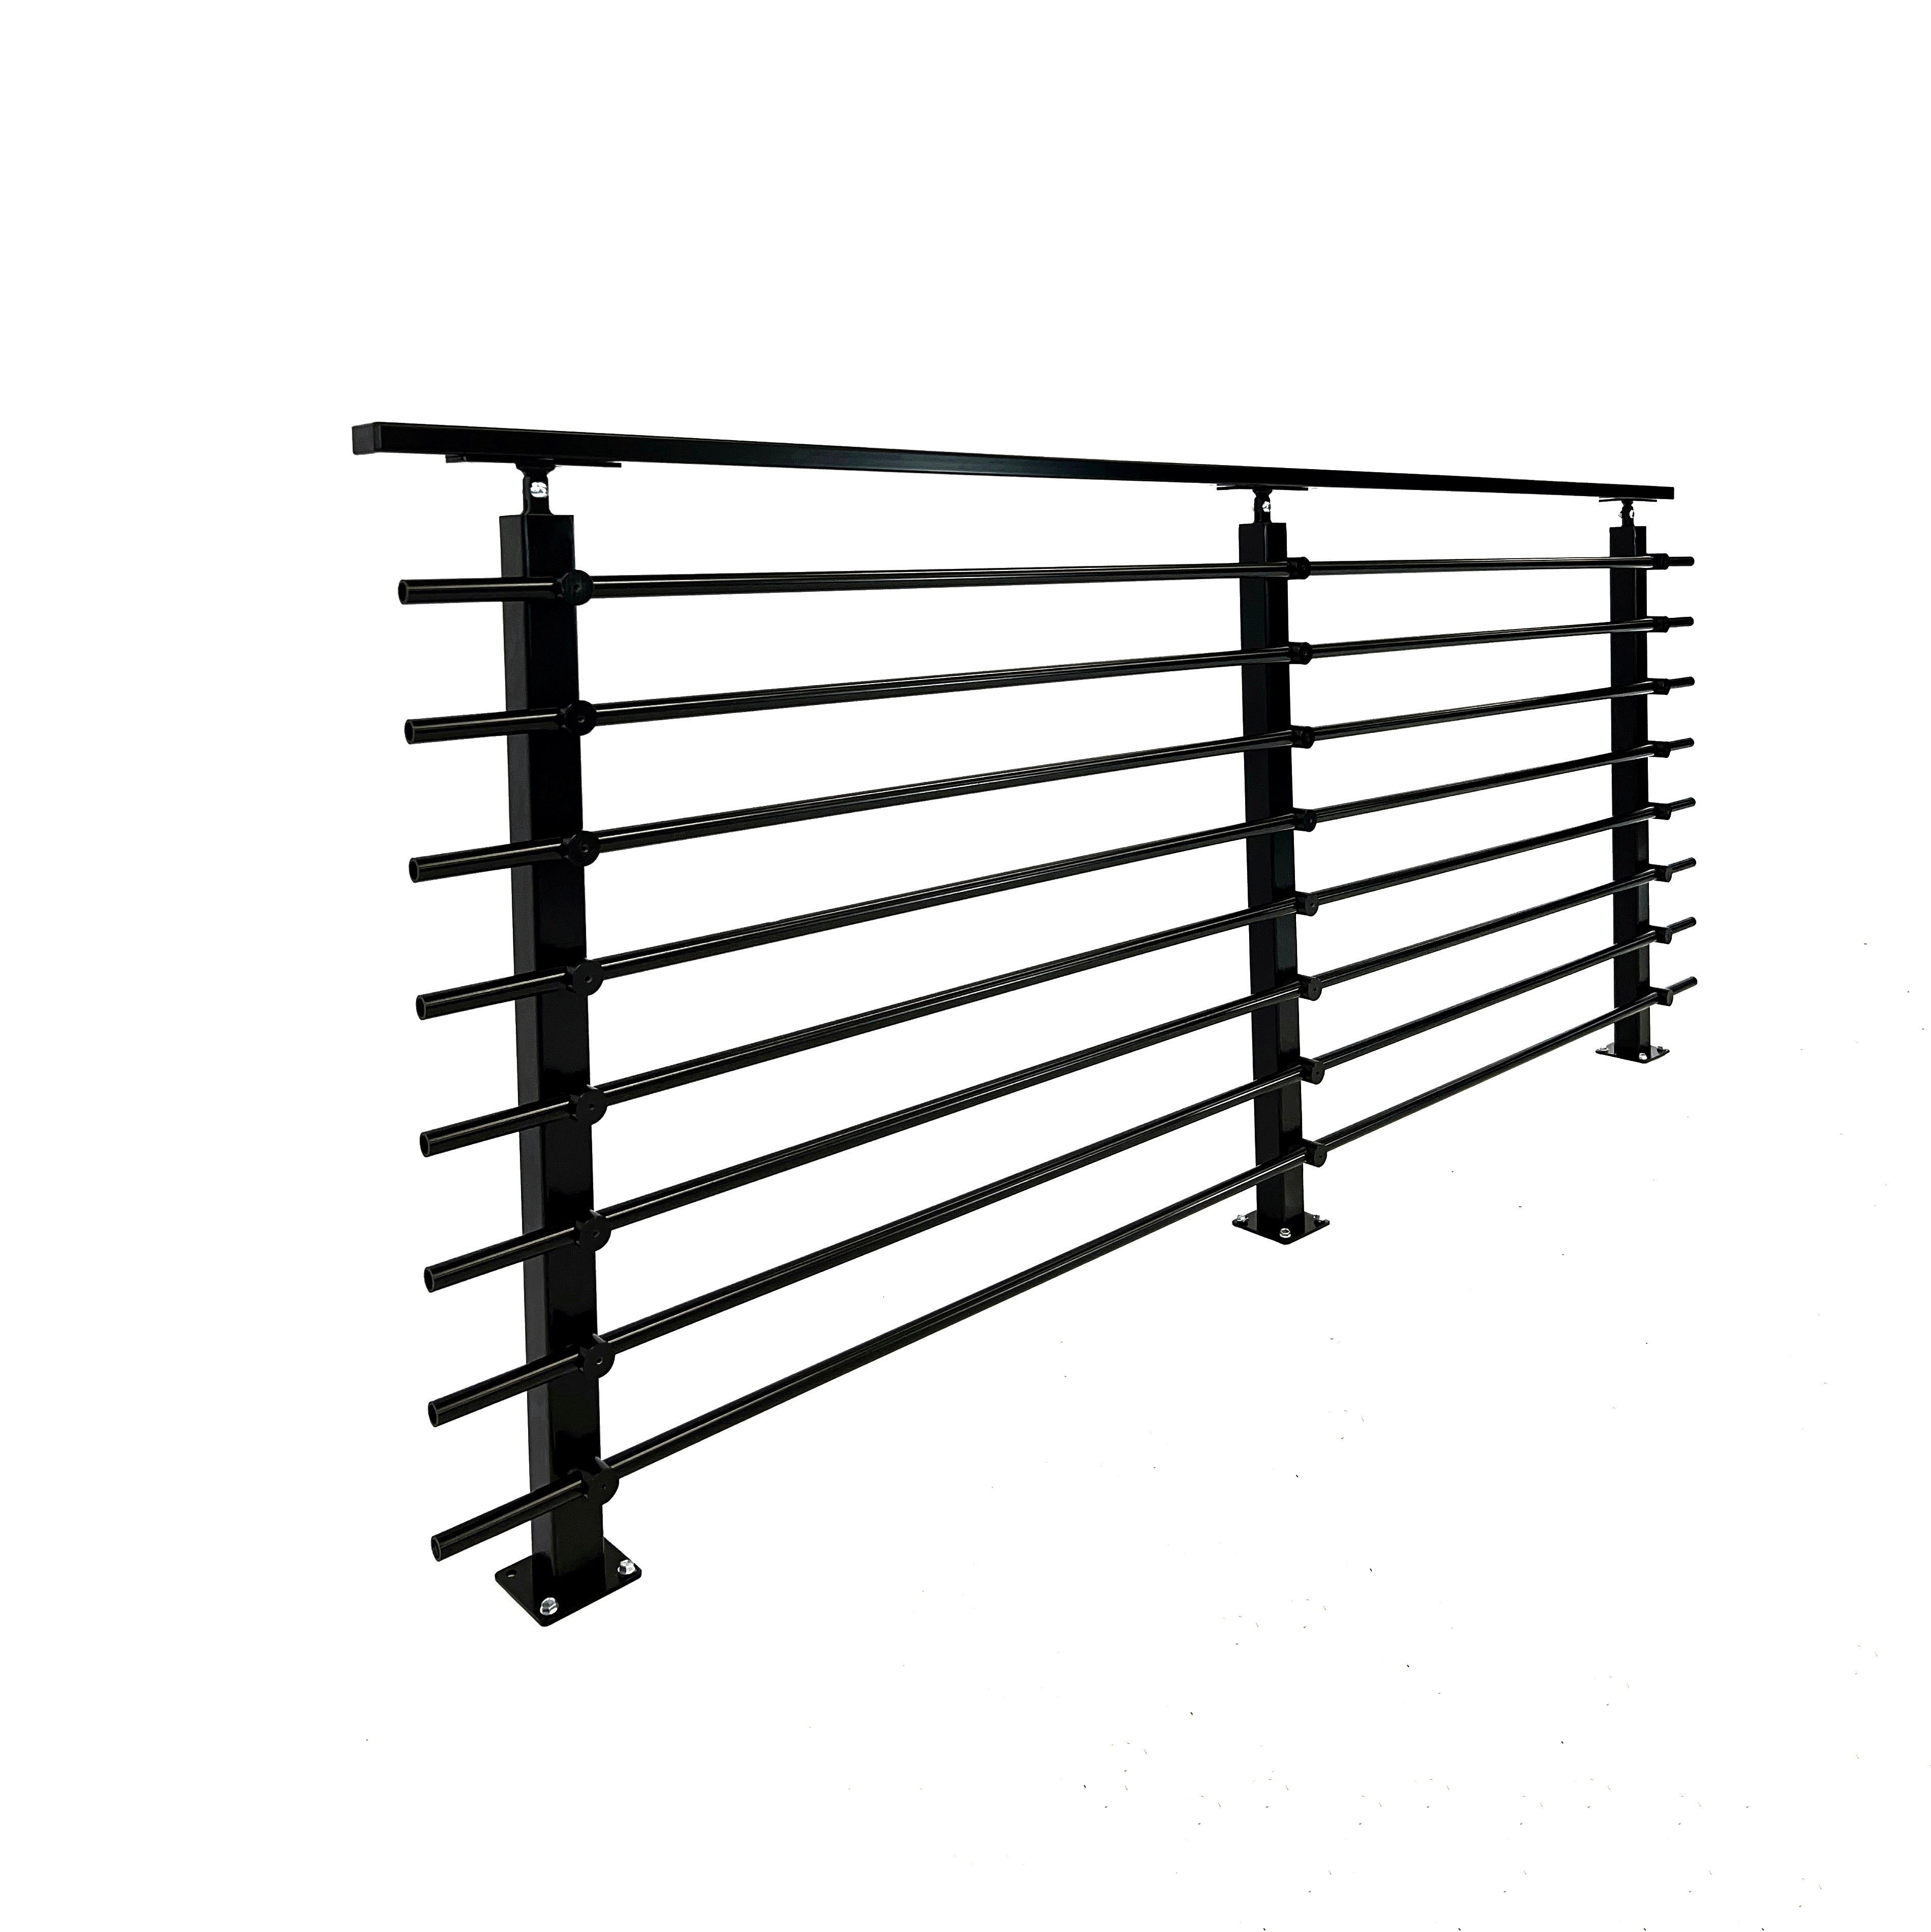 Modern Horizontal Fully Adjustable Railing Banister System, for Staircases, Balconies, and Decks, Complete Guard Railing Kit